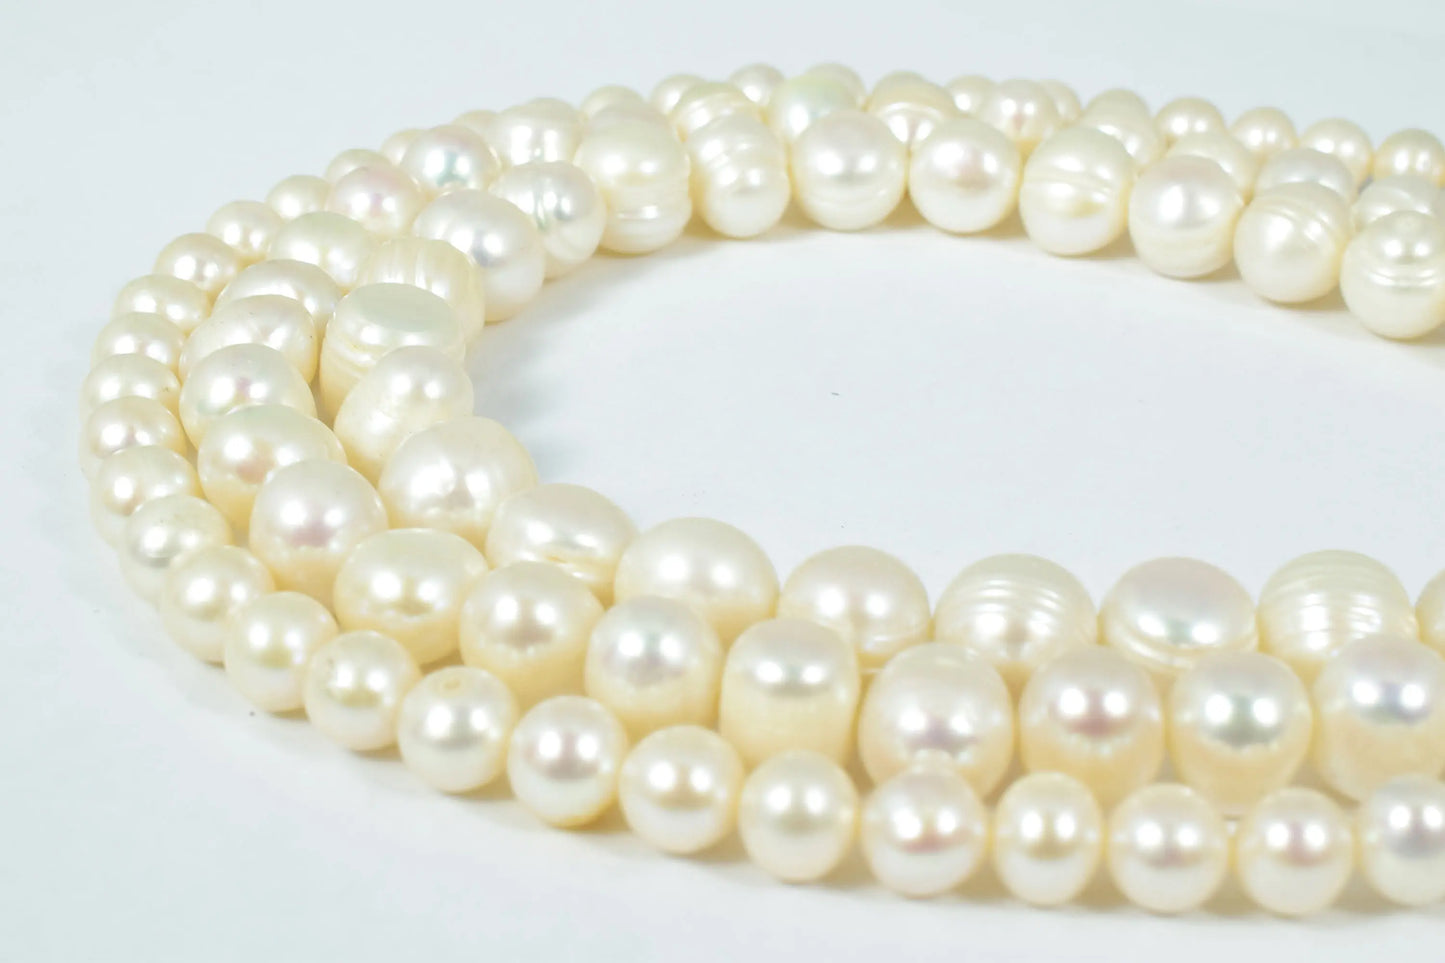 11mm Fresh Water Pearls,  Sold by 1 strand of 39pcs, 1mm hole opening , 67grams/pk - BeadsFindingDepot